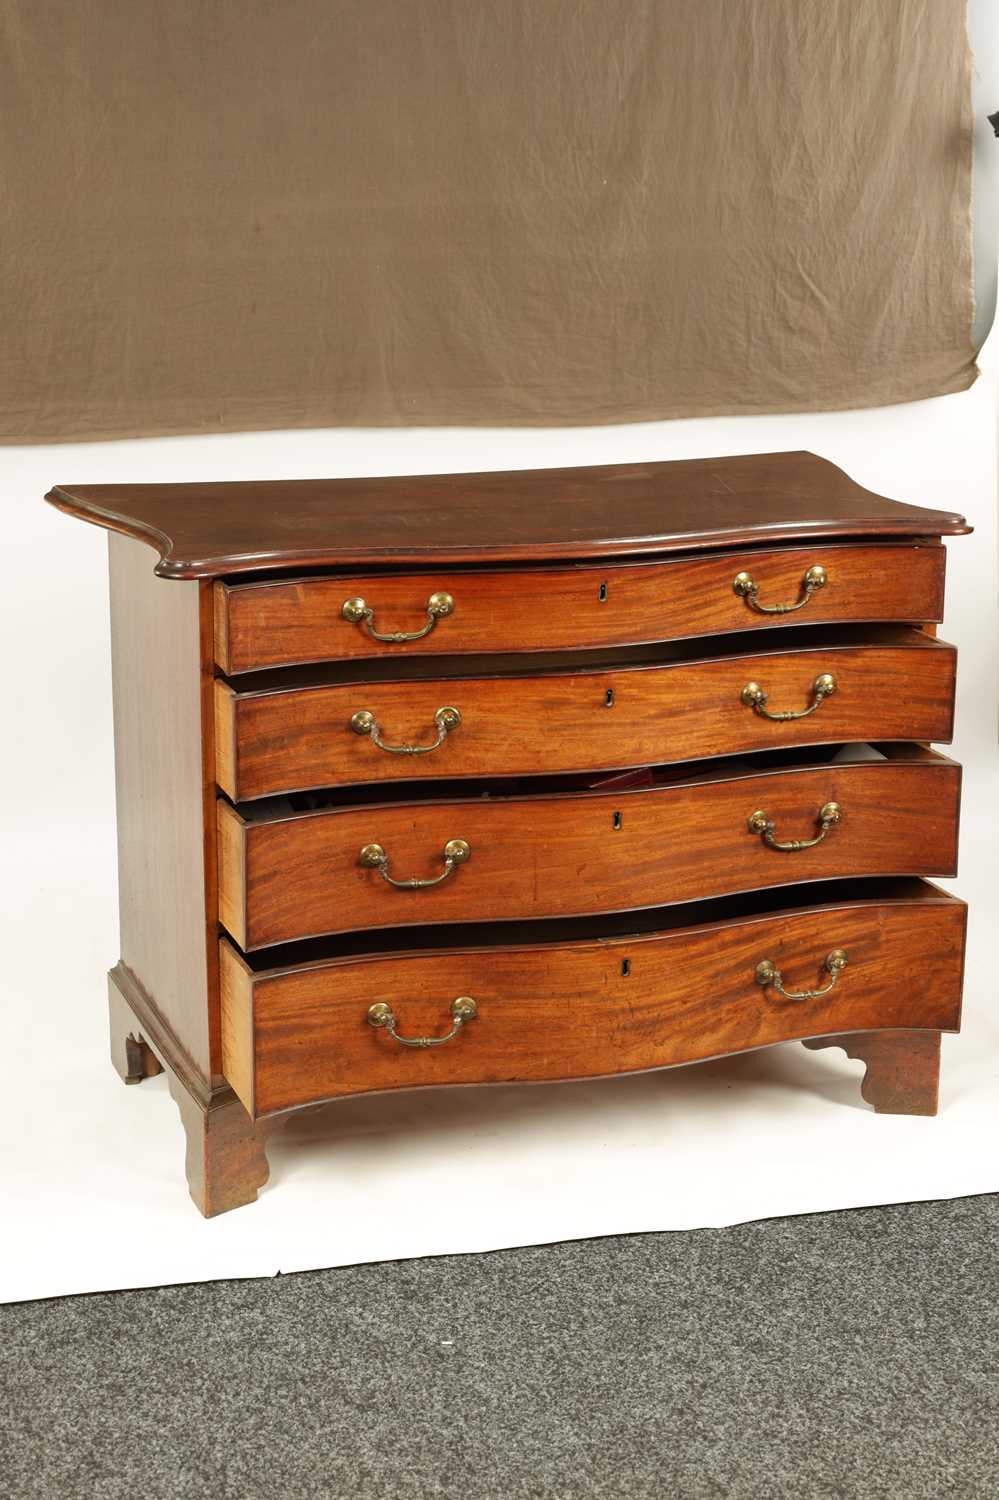 A FINE GEORGE III LOW WAISTED MAHOGANY SERPENTINE CHEST OF DRAWERS - Image 3 of 7